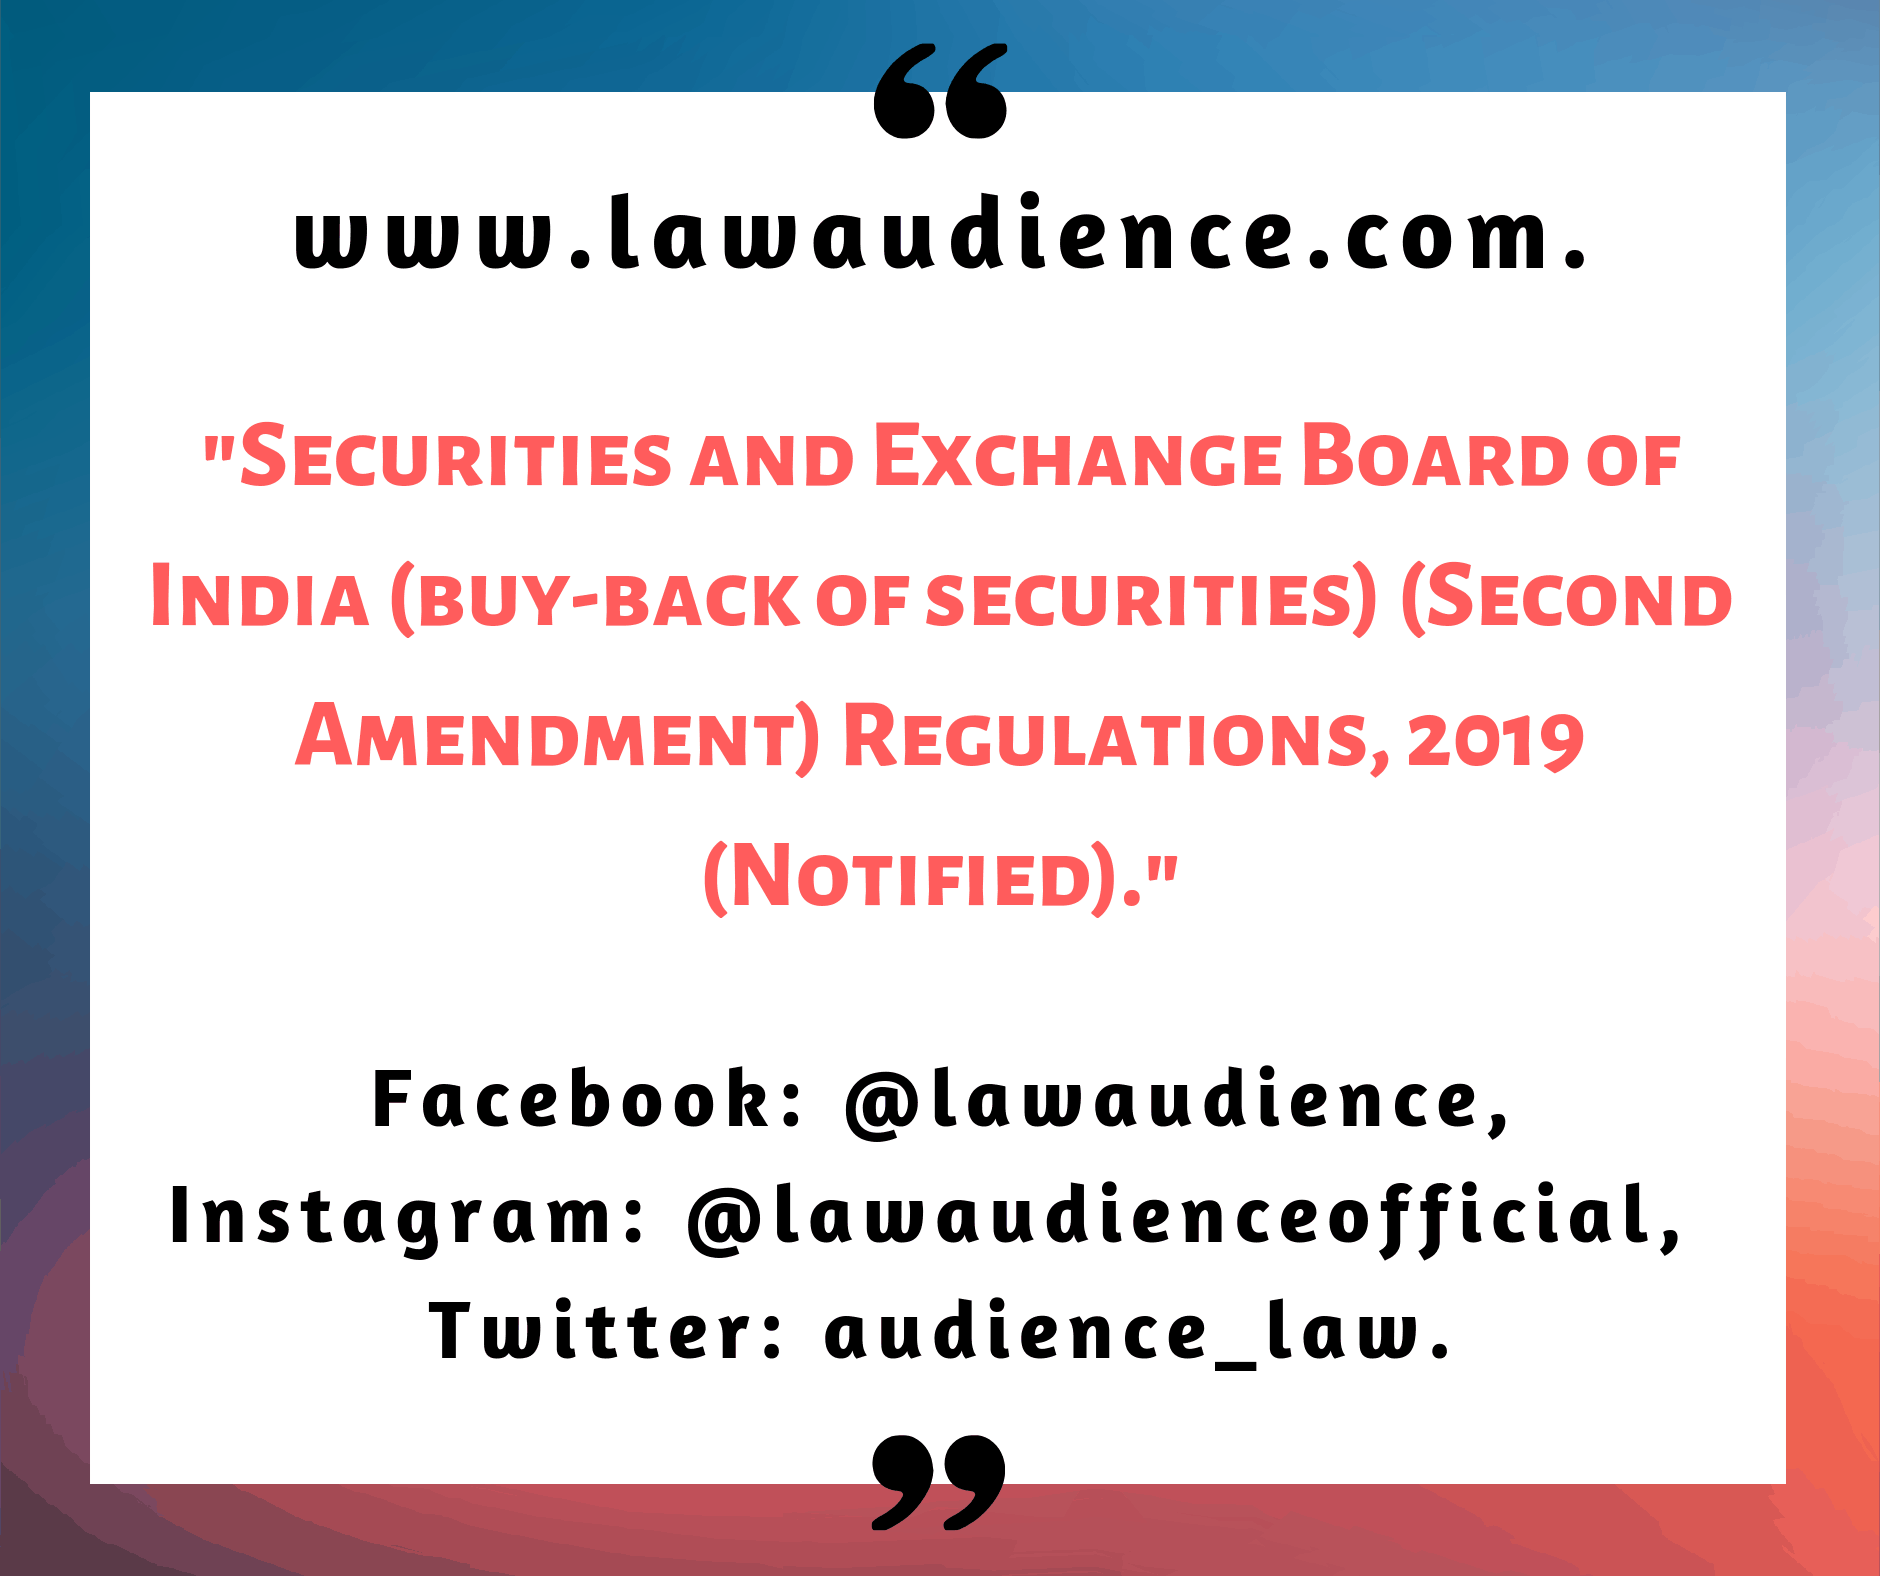 You are currently viewing Securities and Exchange Board of India (Buy-Back of Securities) (Second Amendment) Regulations, 2019.